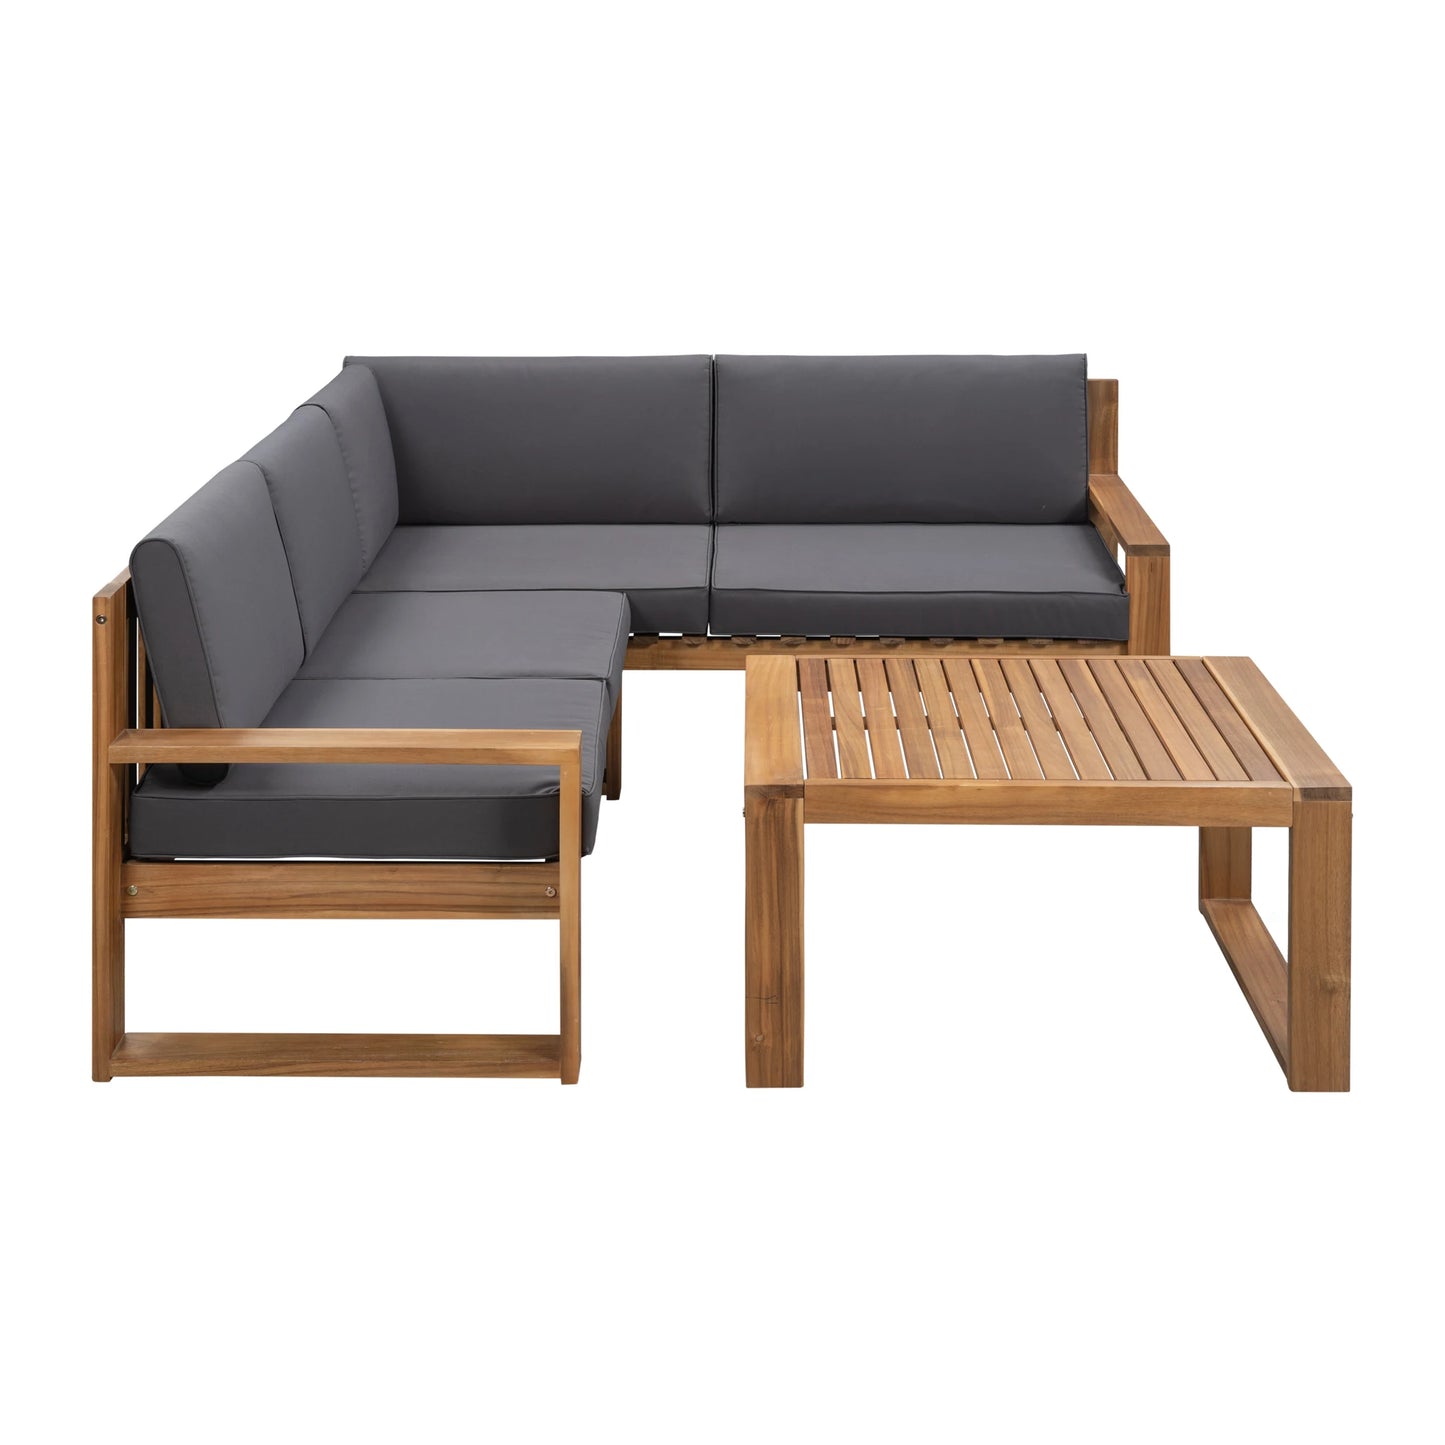 3-Piece Patio Sectional Outdoor Furniture Set Acacia Wood and Grey Cushions